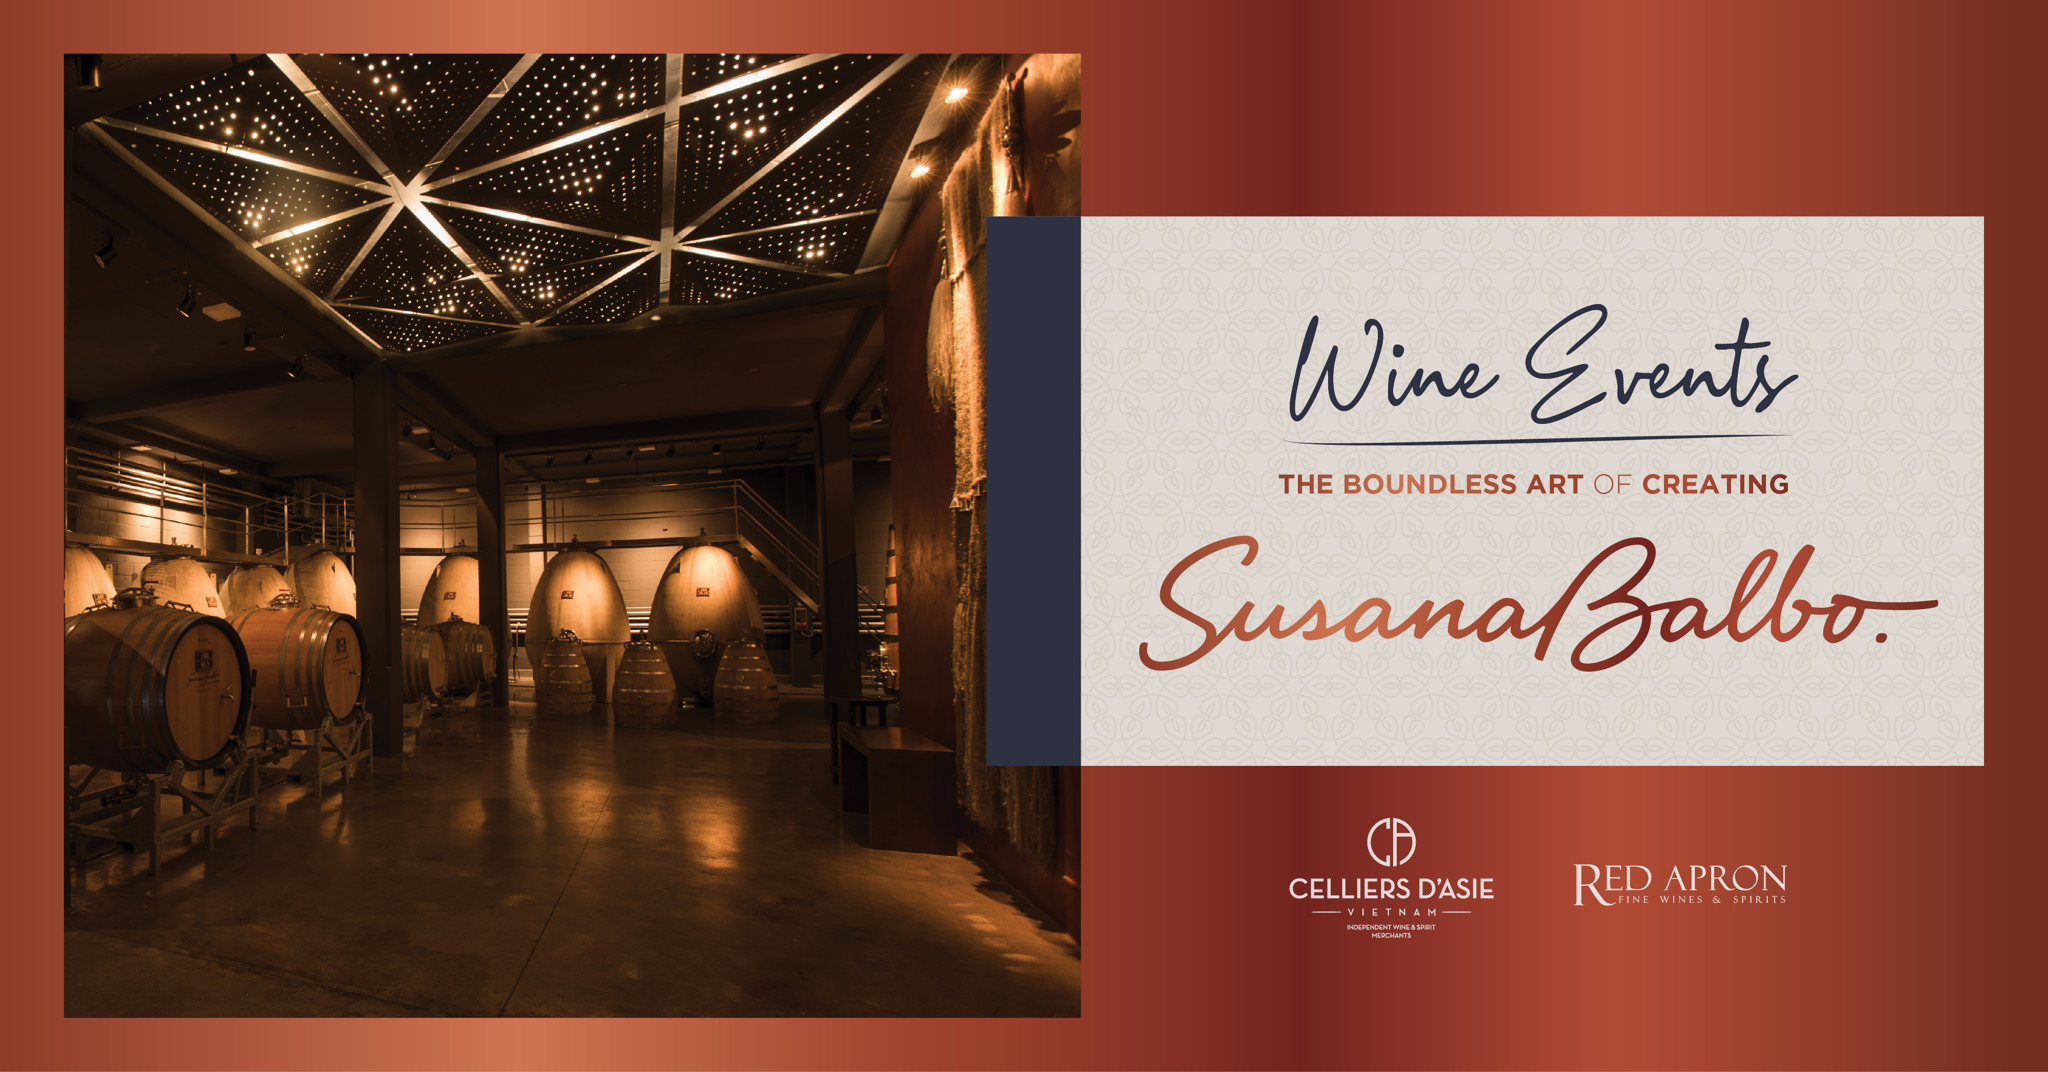 HOI AN - SUSANA BALBO WINE DINNER (INVITATION ONLY) | THE BOUNDLESS ART OF CREATING